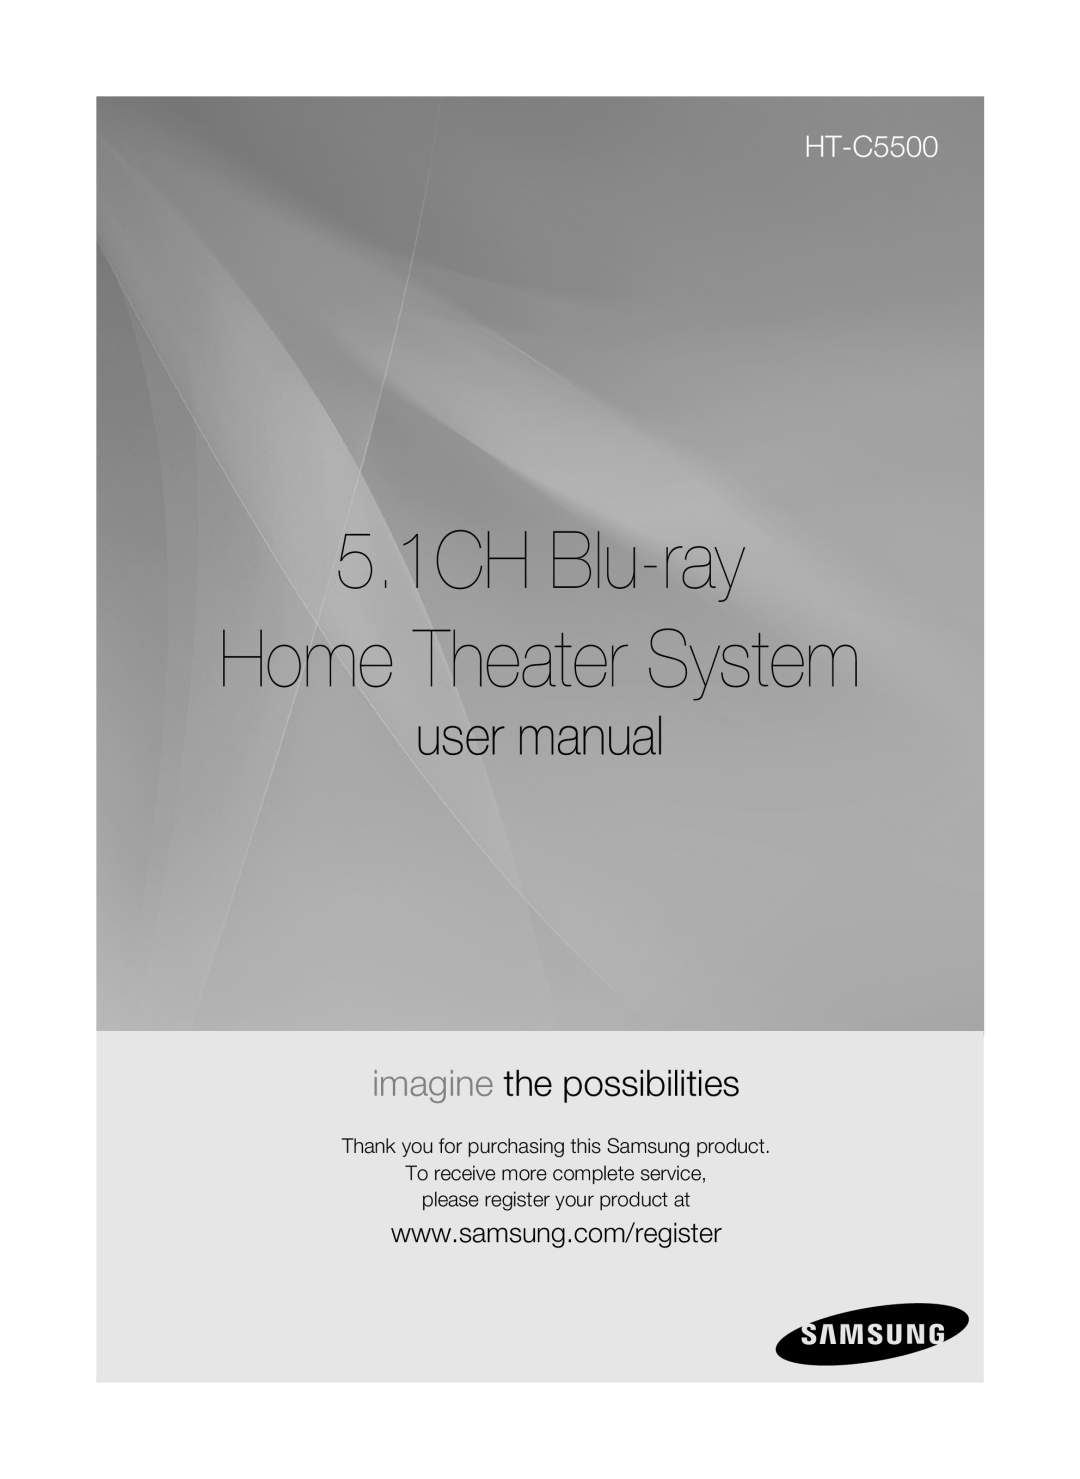 Samsung HT-C5500 user manual Thank you for purchasing this Samsung product, To receive more complete service 